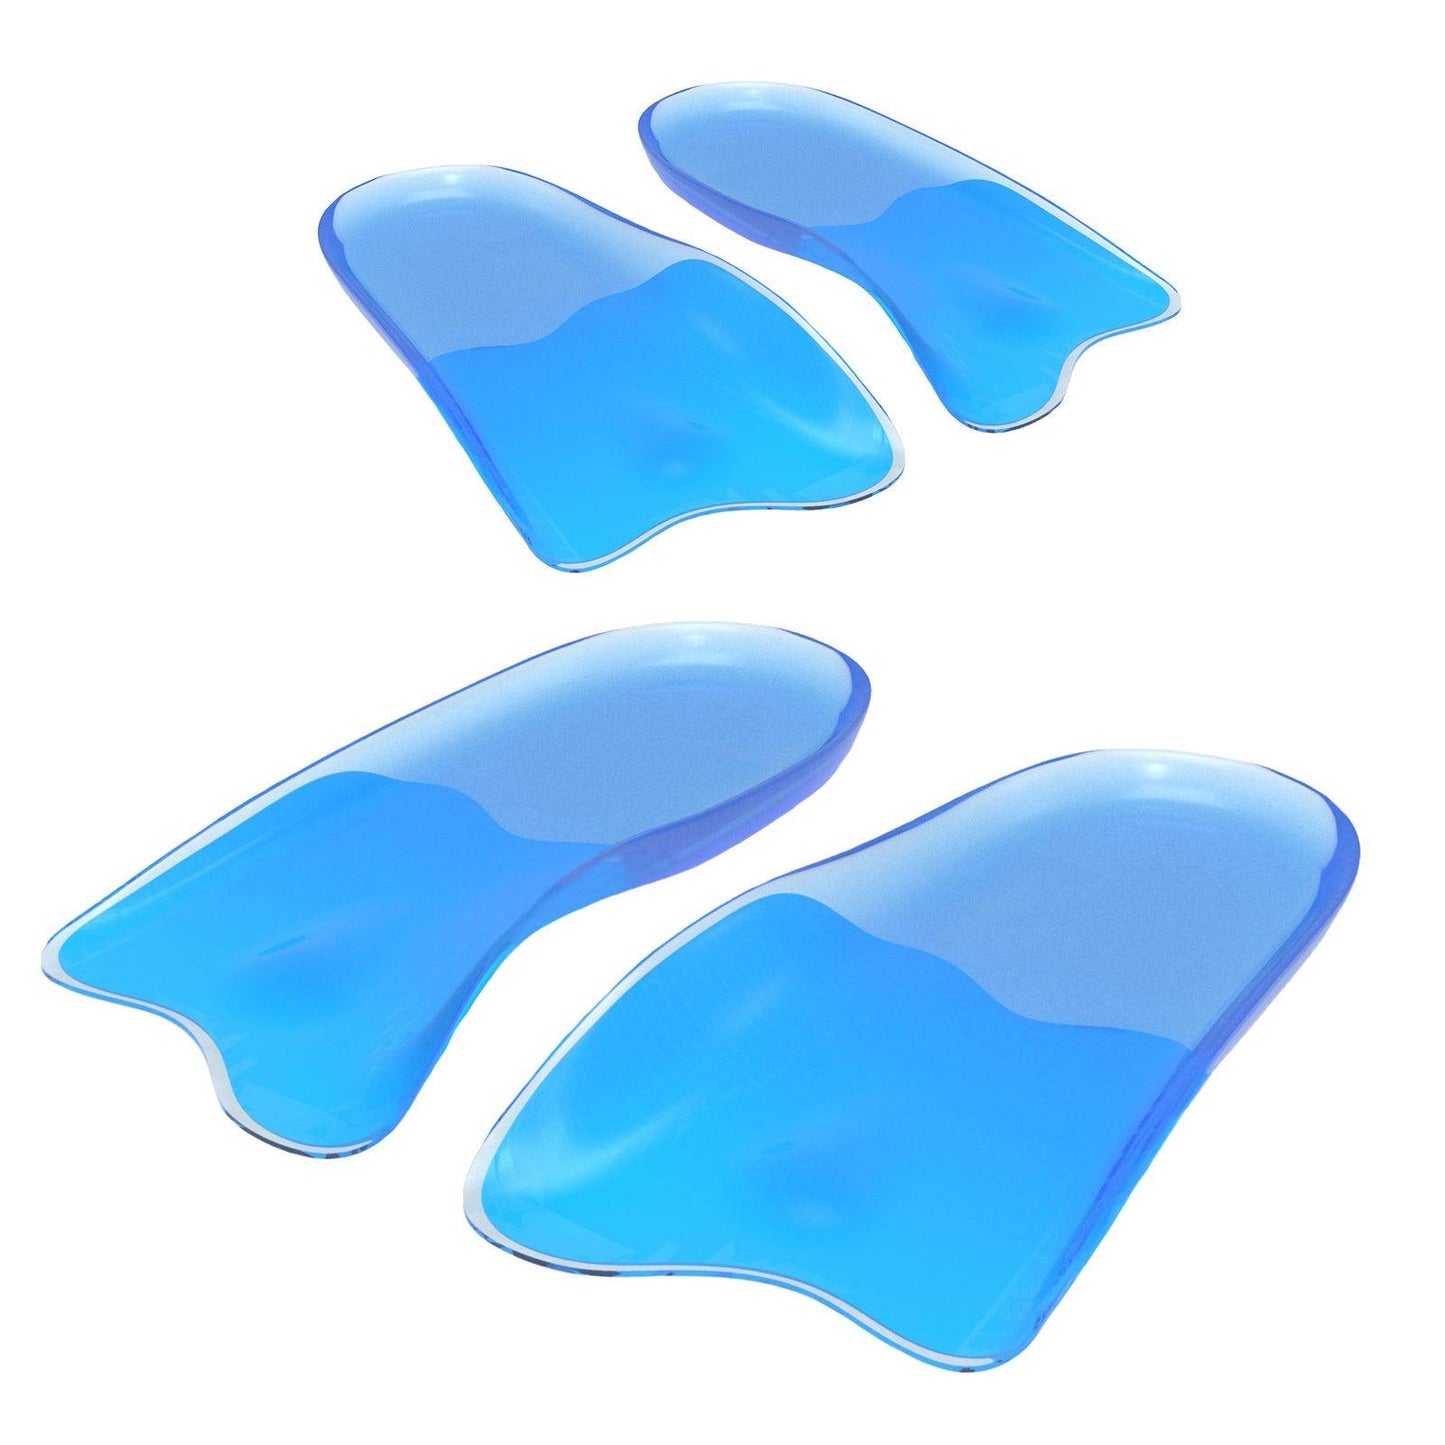 Bibal Insole 2X Pair S Size Gel Half Insoles Shoe Inserts Arch Support Foot Pad